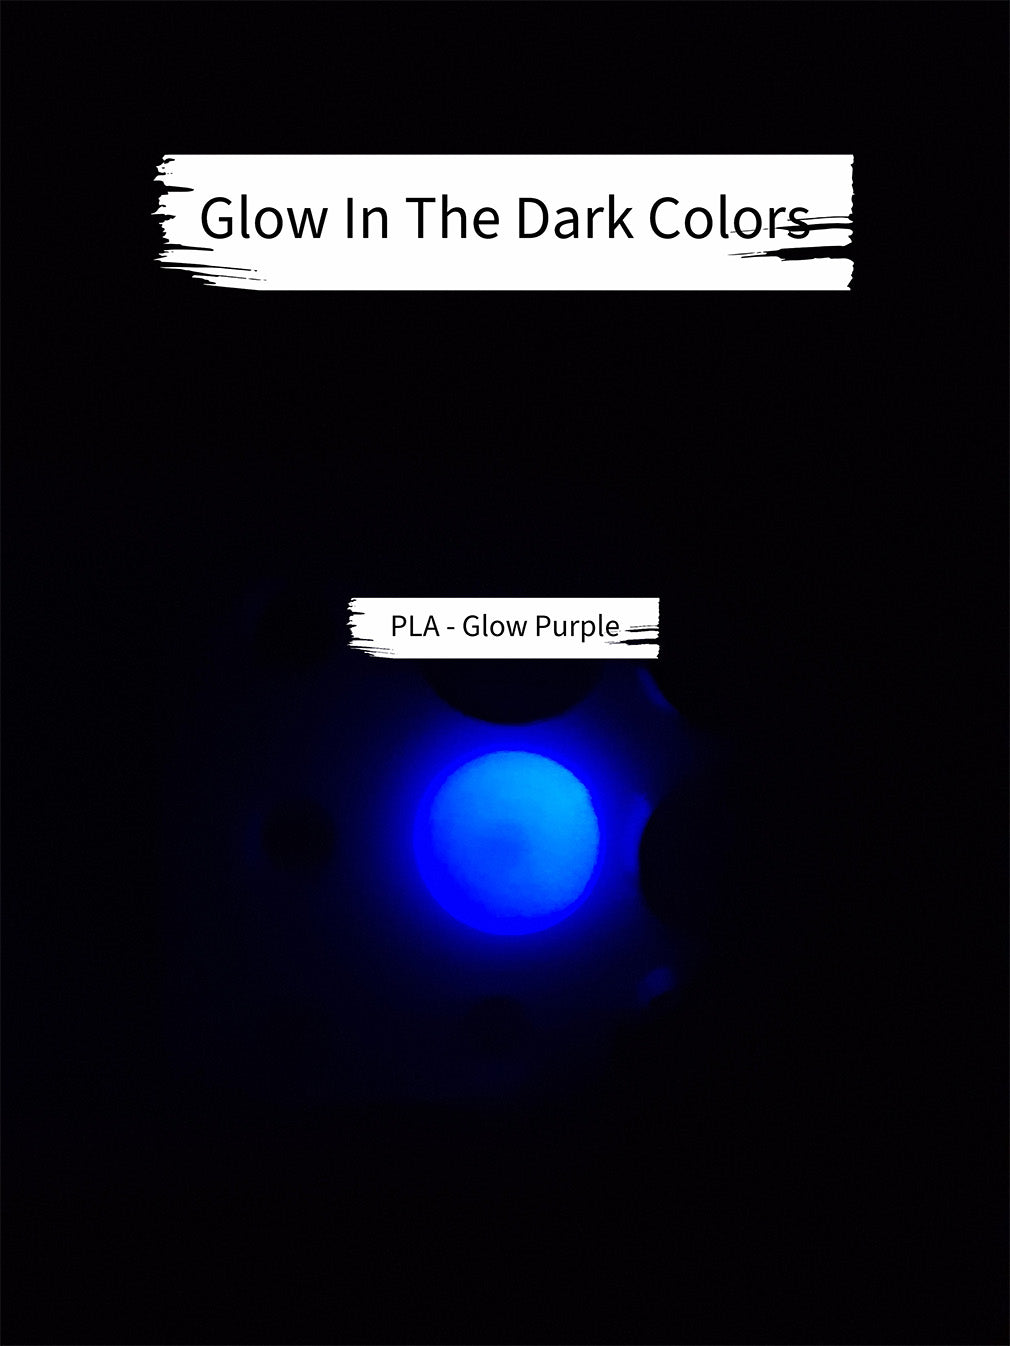 Sample of Giantarm purple glow PLA illuminated in the dark, showcasing a vibrant purple glow. The text 'Glow In The Dark Colors' and 'PLA - Glow Purple' indicate the type of material, set against a stark black background to emphasize the glow effect.